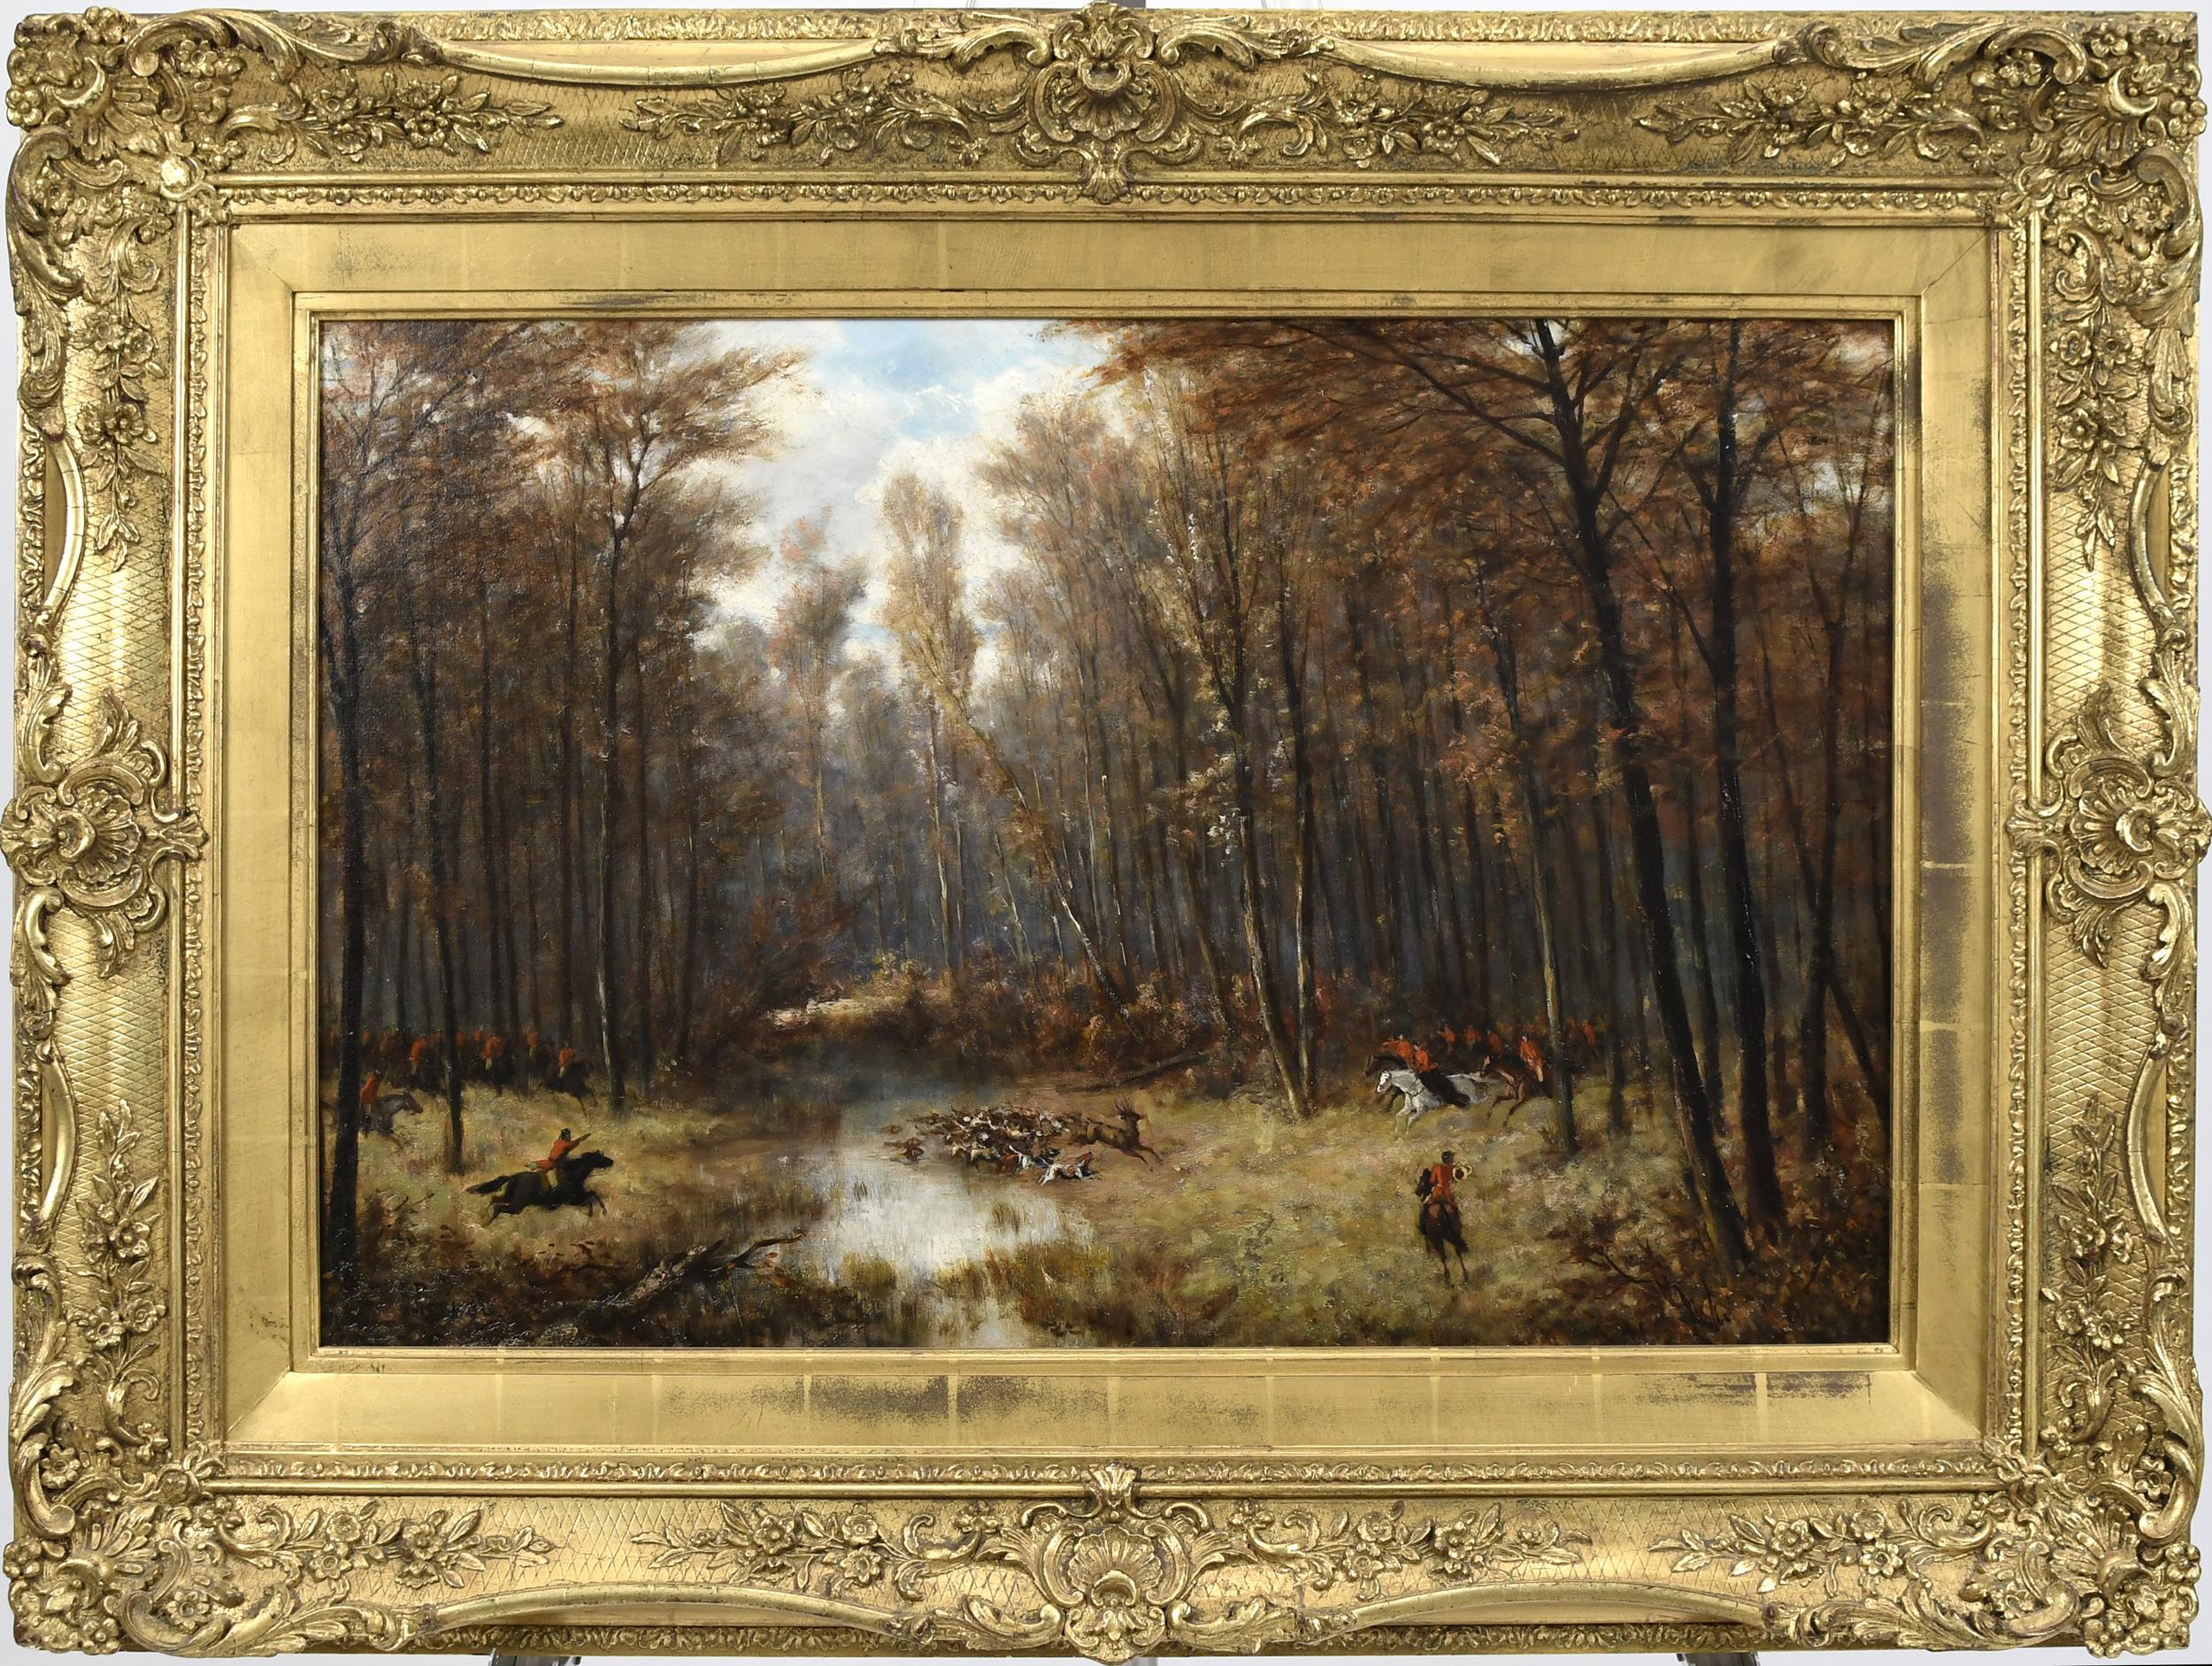 J PREVOT STAG HUNTING OIL ON CANVAS  307827